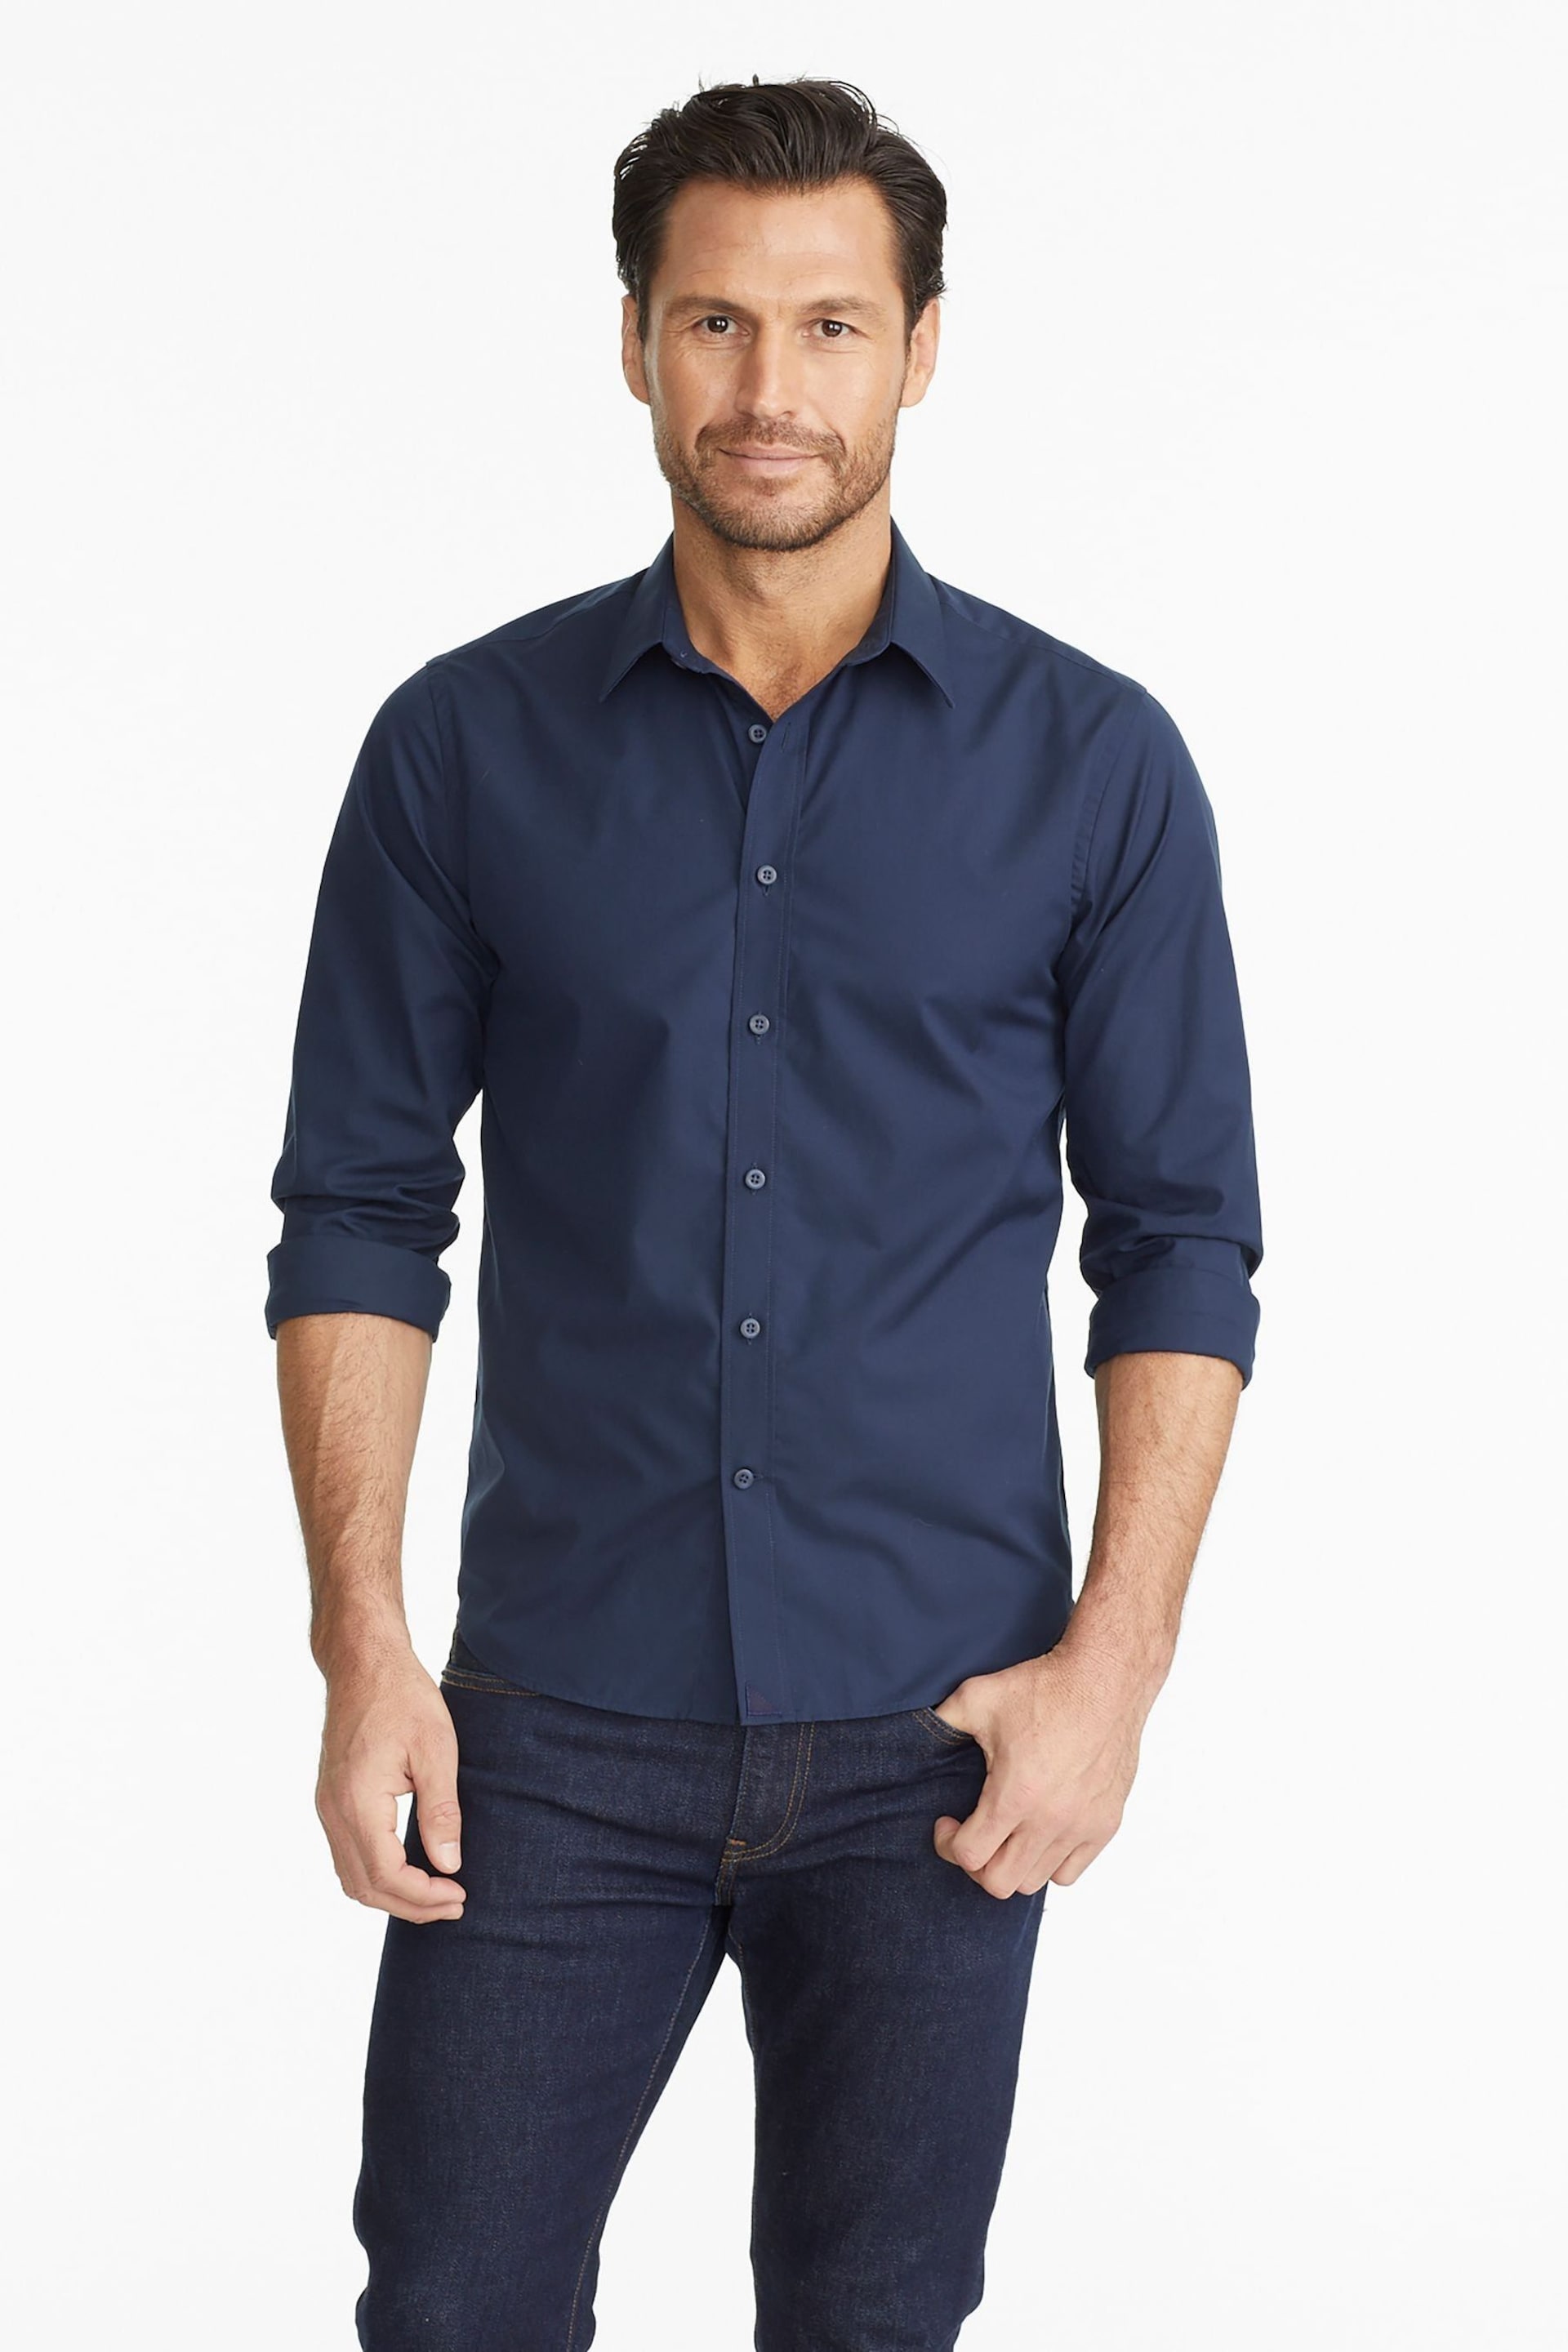 UNTUCKit Dark Blue Wrinkle-Free Relaxed Fit Castello Shirt - Image 1 of 6